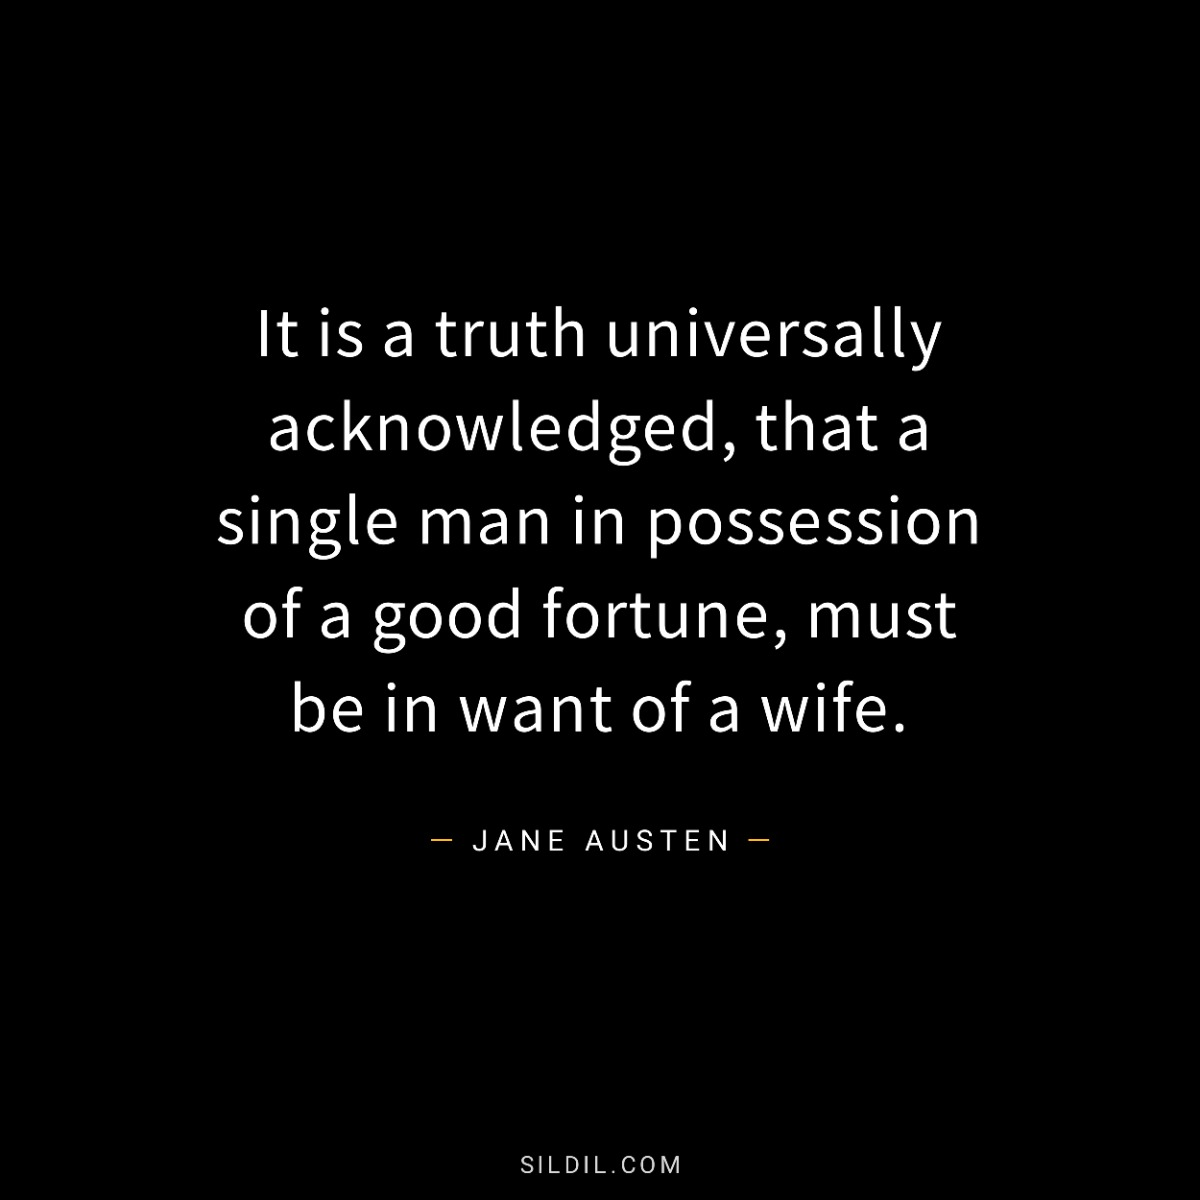 It is a truth universally acknowledged, that a single man in possession of a good fortune, must be in want of a wife.